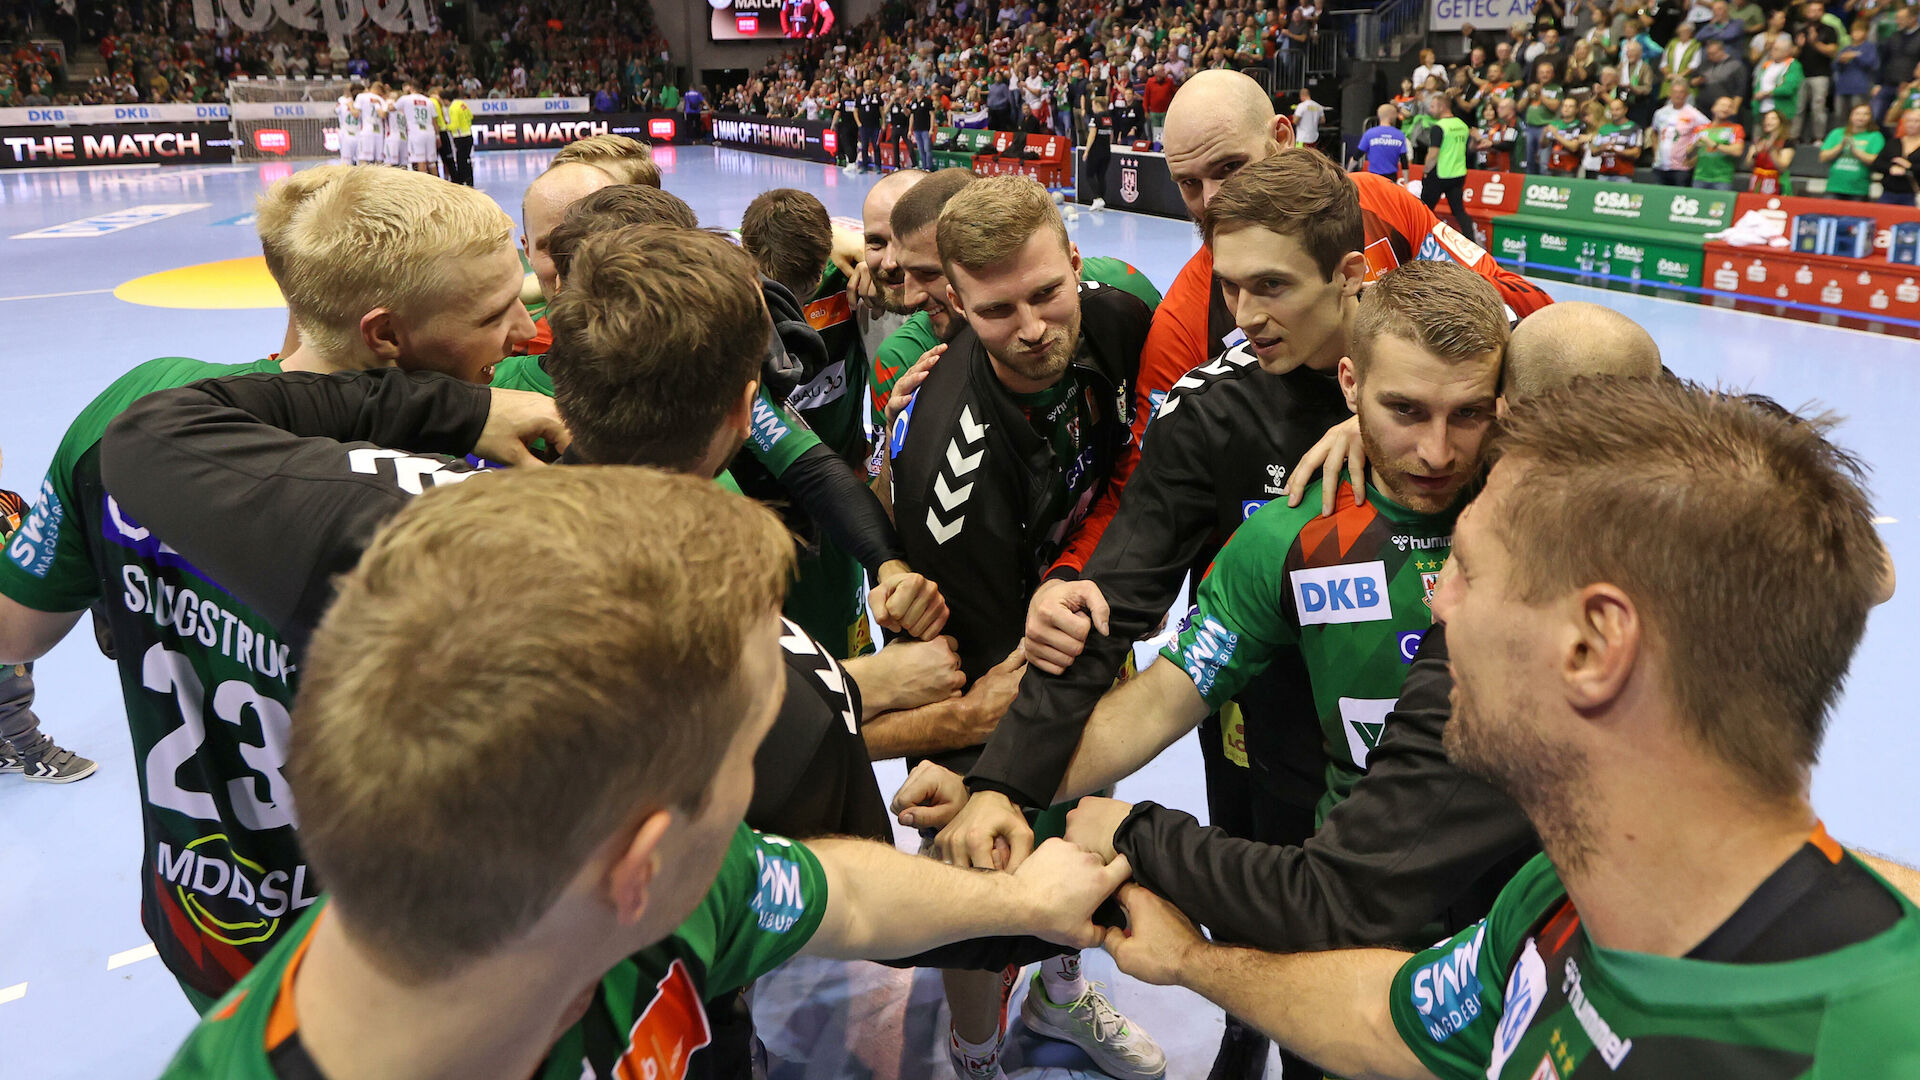 21 years after the first title, SC Magdeburg once again dream of the Champions League crown News LIQUI MOLY HBL